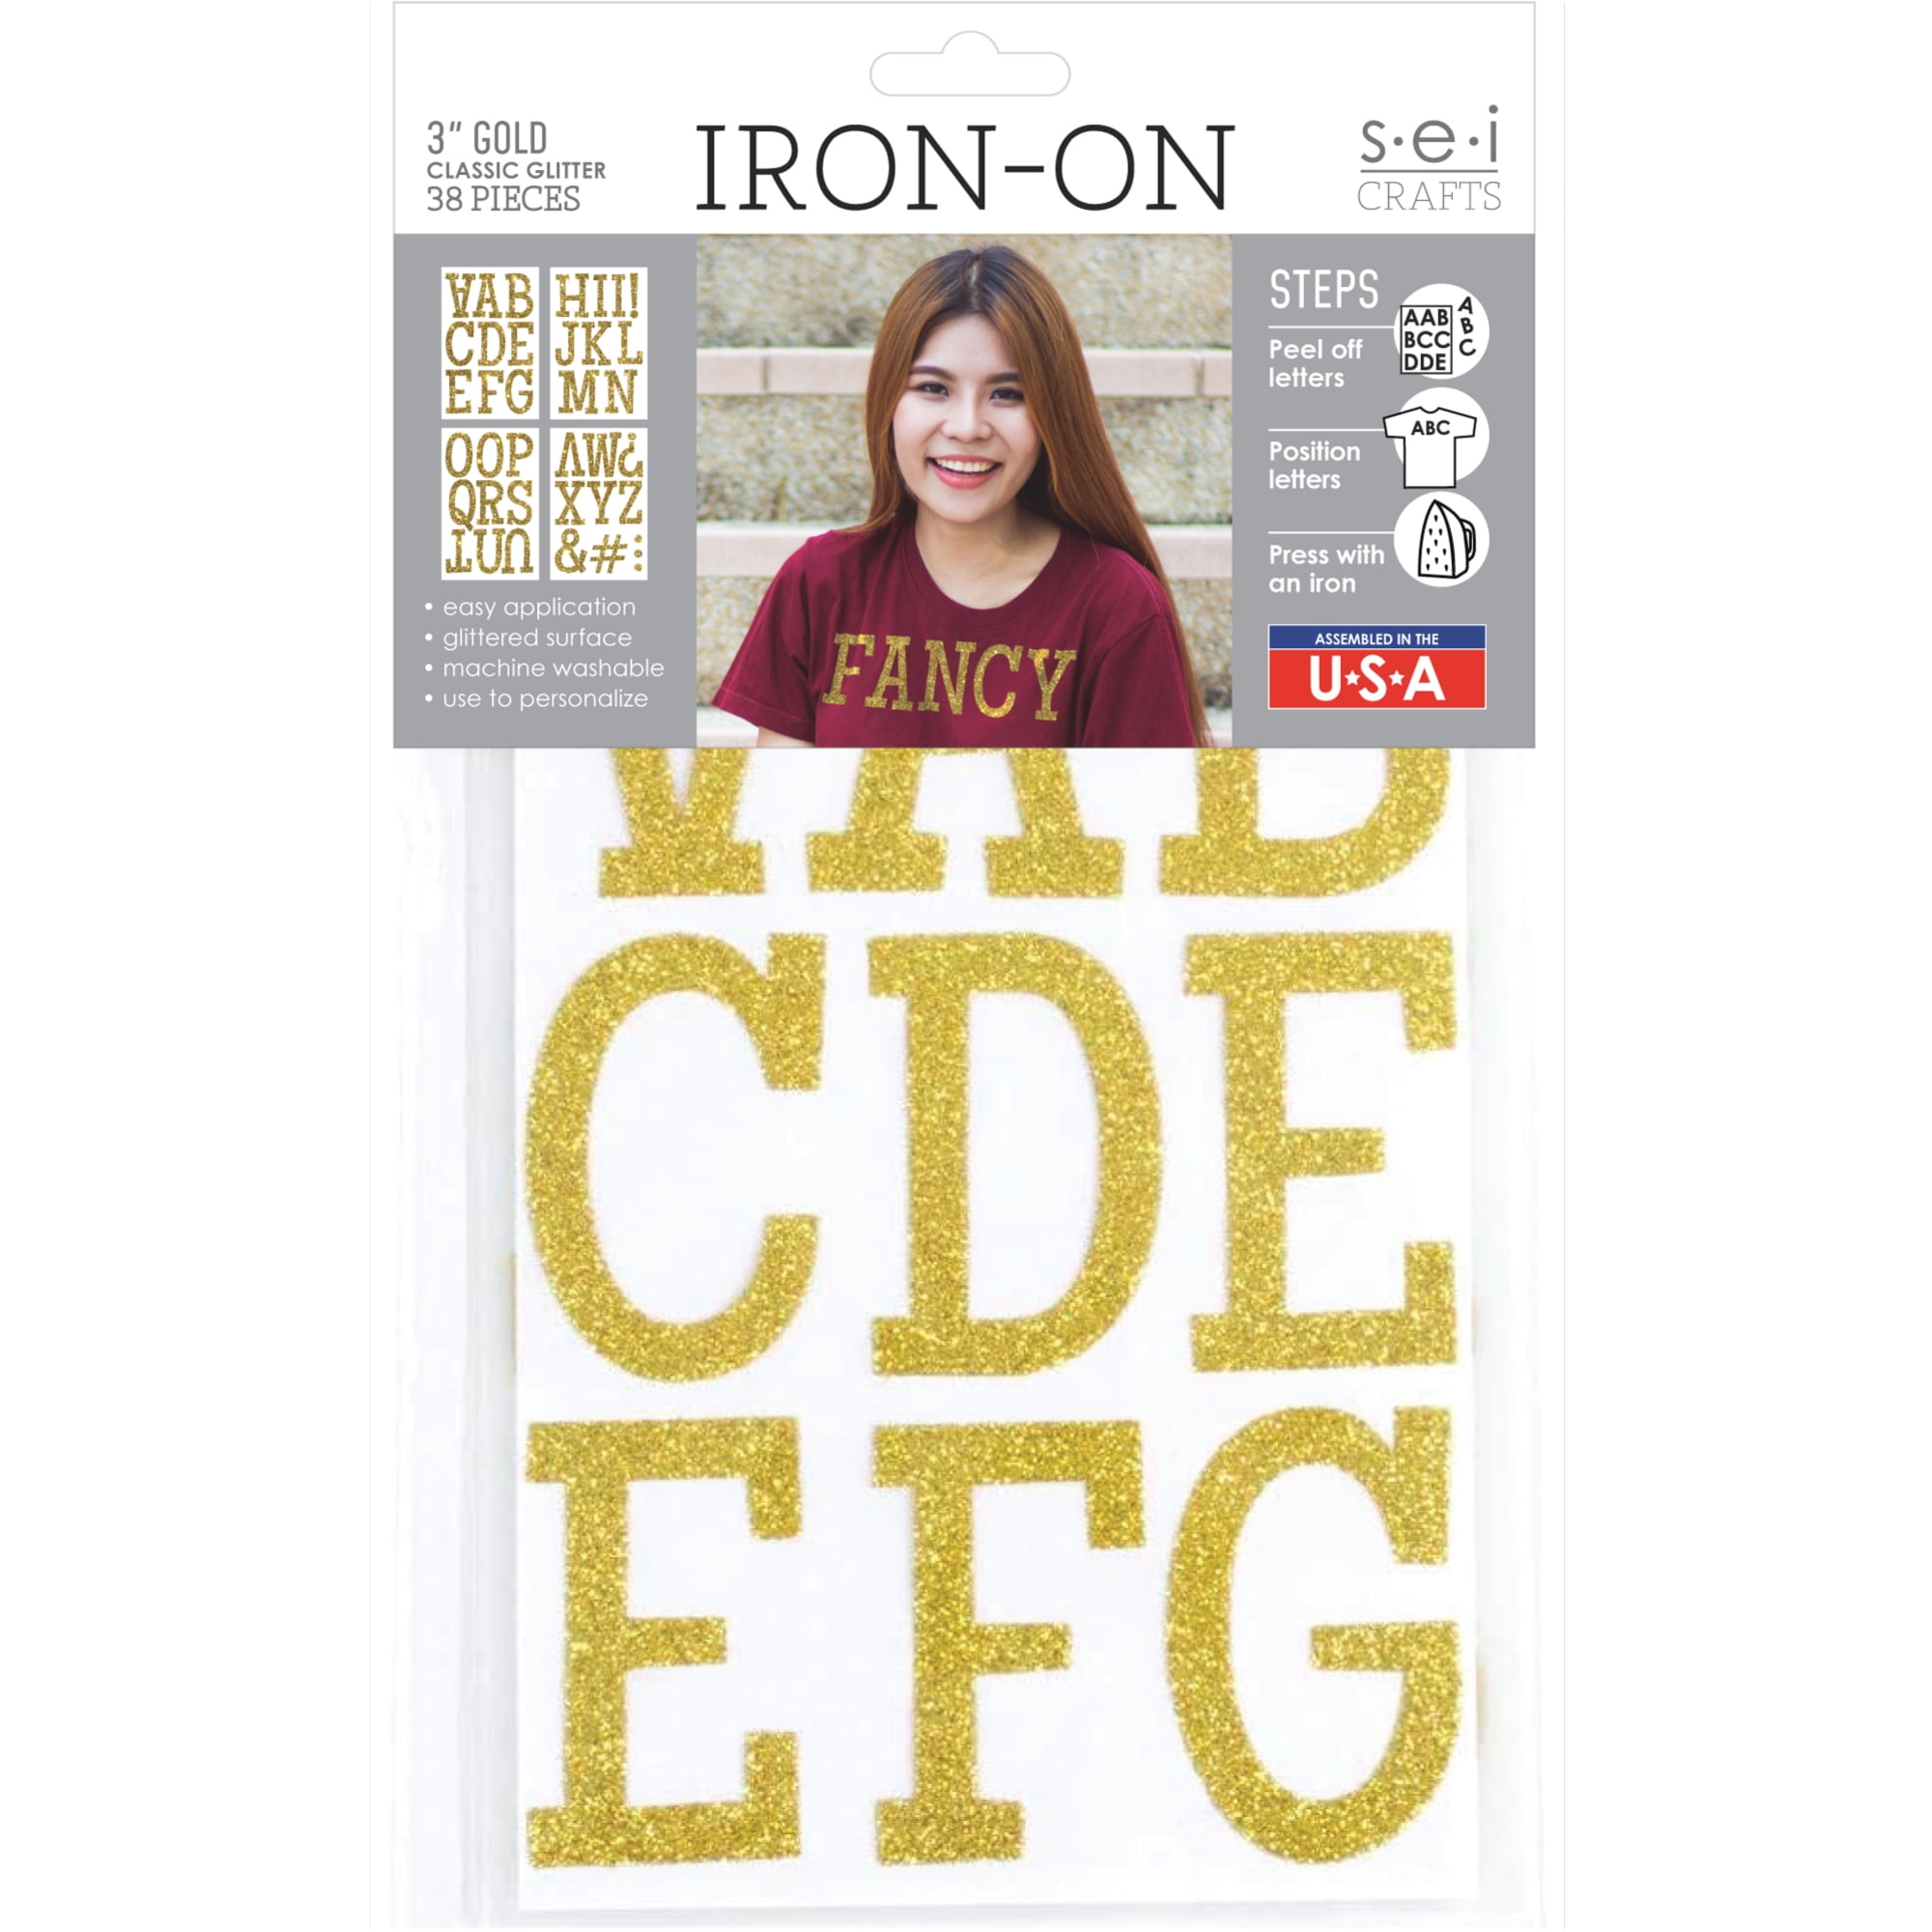 SEI 3 Inch Iron-on T-shirt Letters, Classic Glitter Letter Heat Transfers,  Gold 